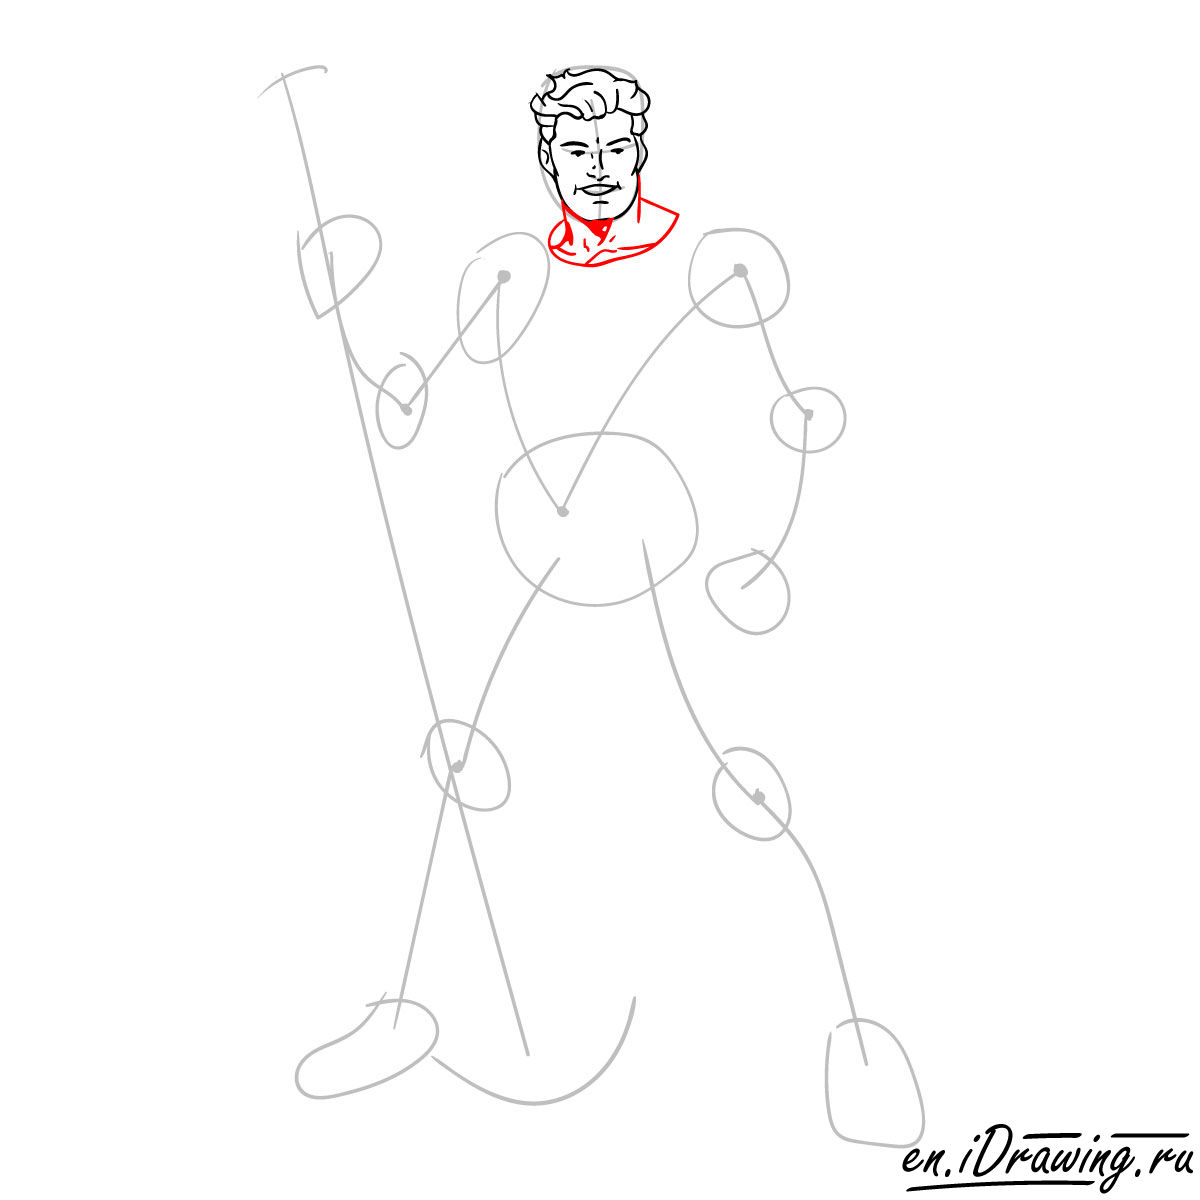 How to draw Aquaman from cartoons and comic books - step 05